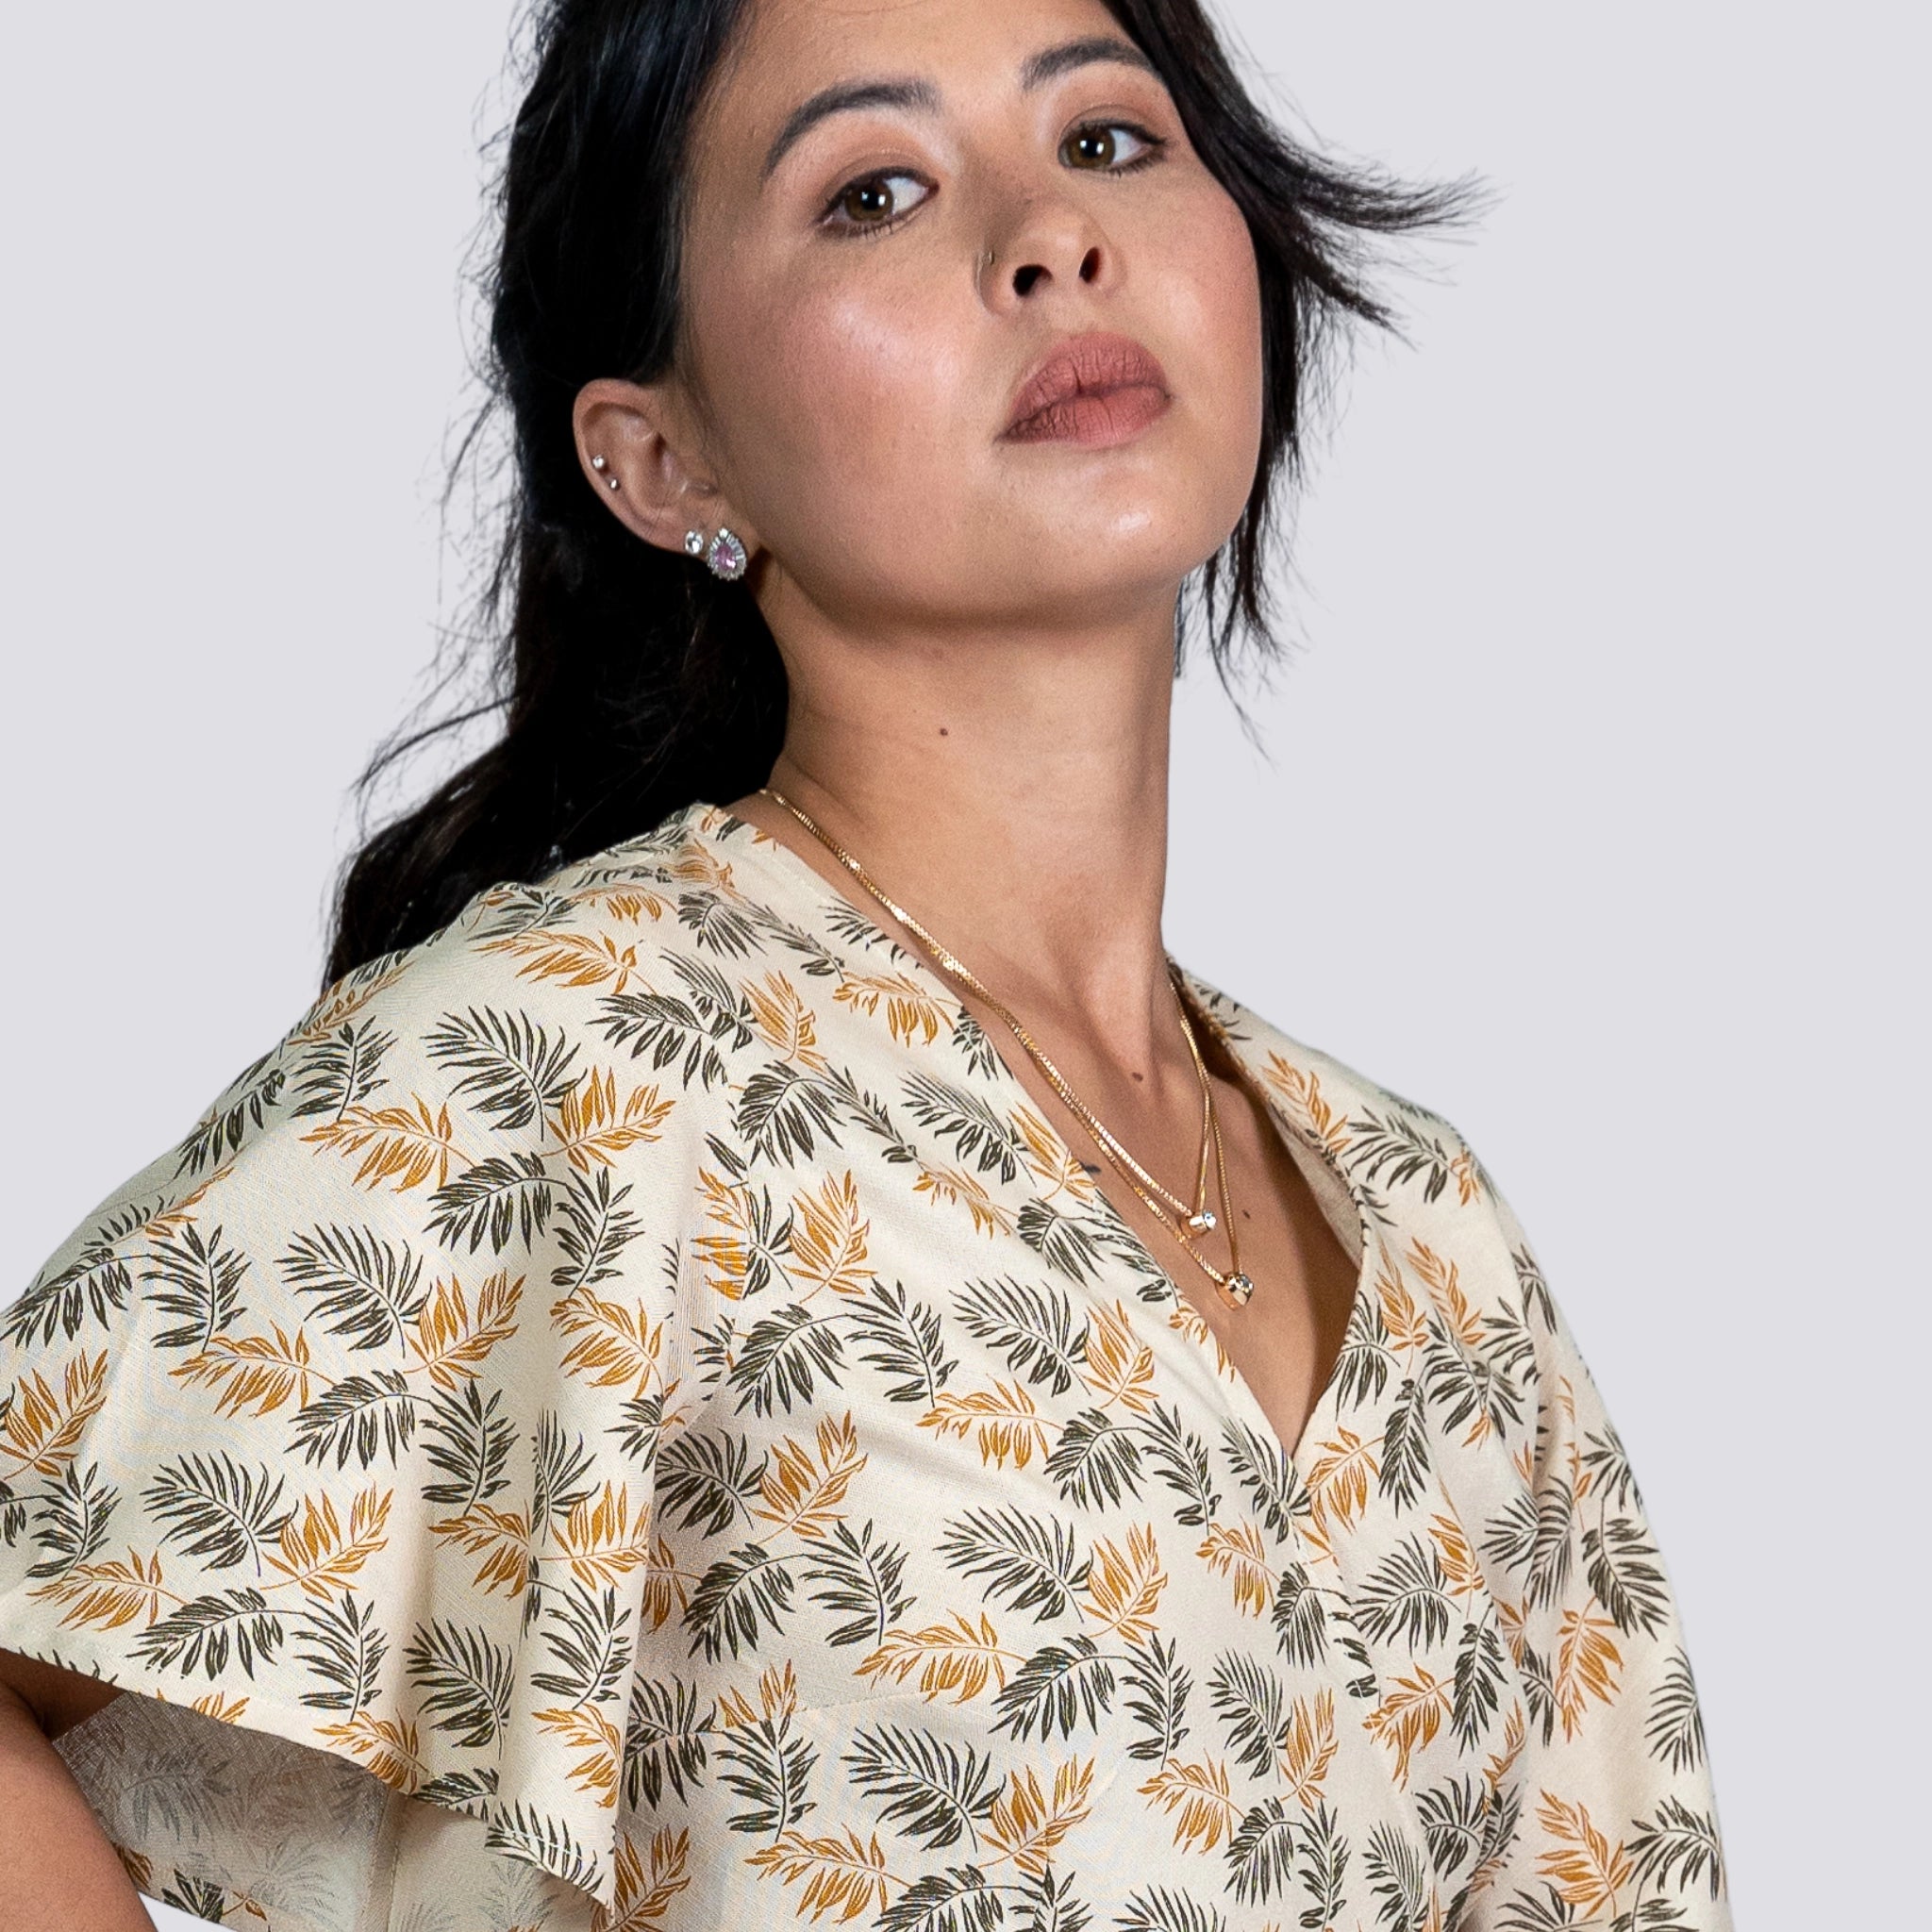 A woman with dark hair wearing a ChicPalms Women's Eco-Friendly Wrap Top in Biscuit Bliss by Karee, along with subtle jewelry, looking confidently off-camera against a light grey background.